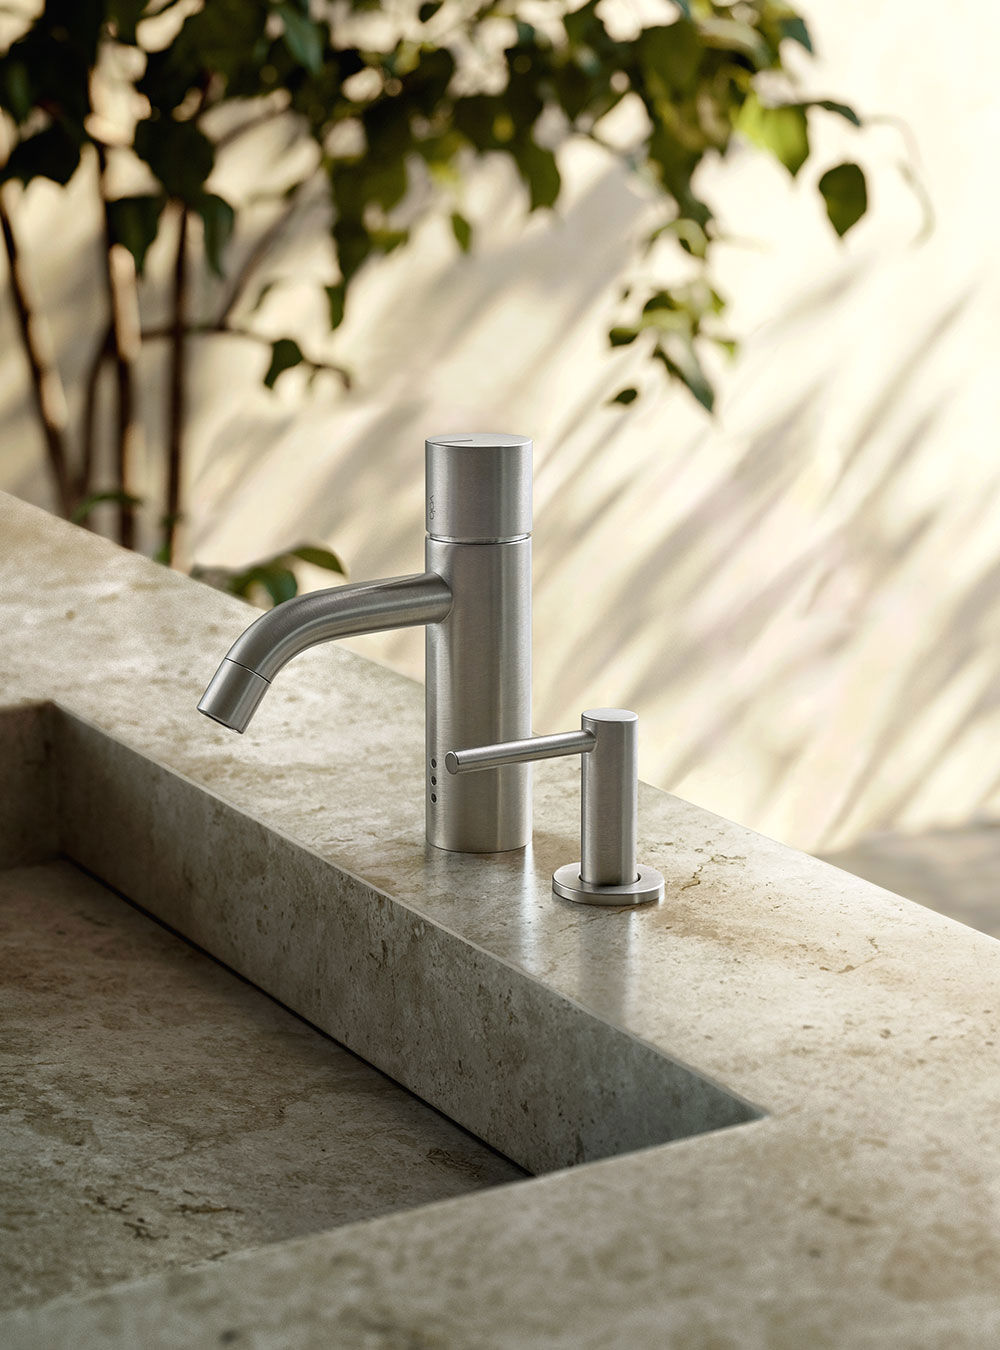 HV1ET36: Basin mixer with on-off sensor for ‘hands free’ operation with deck-mounted soap dispenser T36.The t